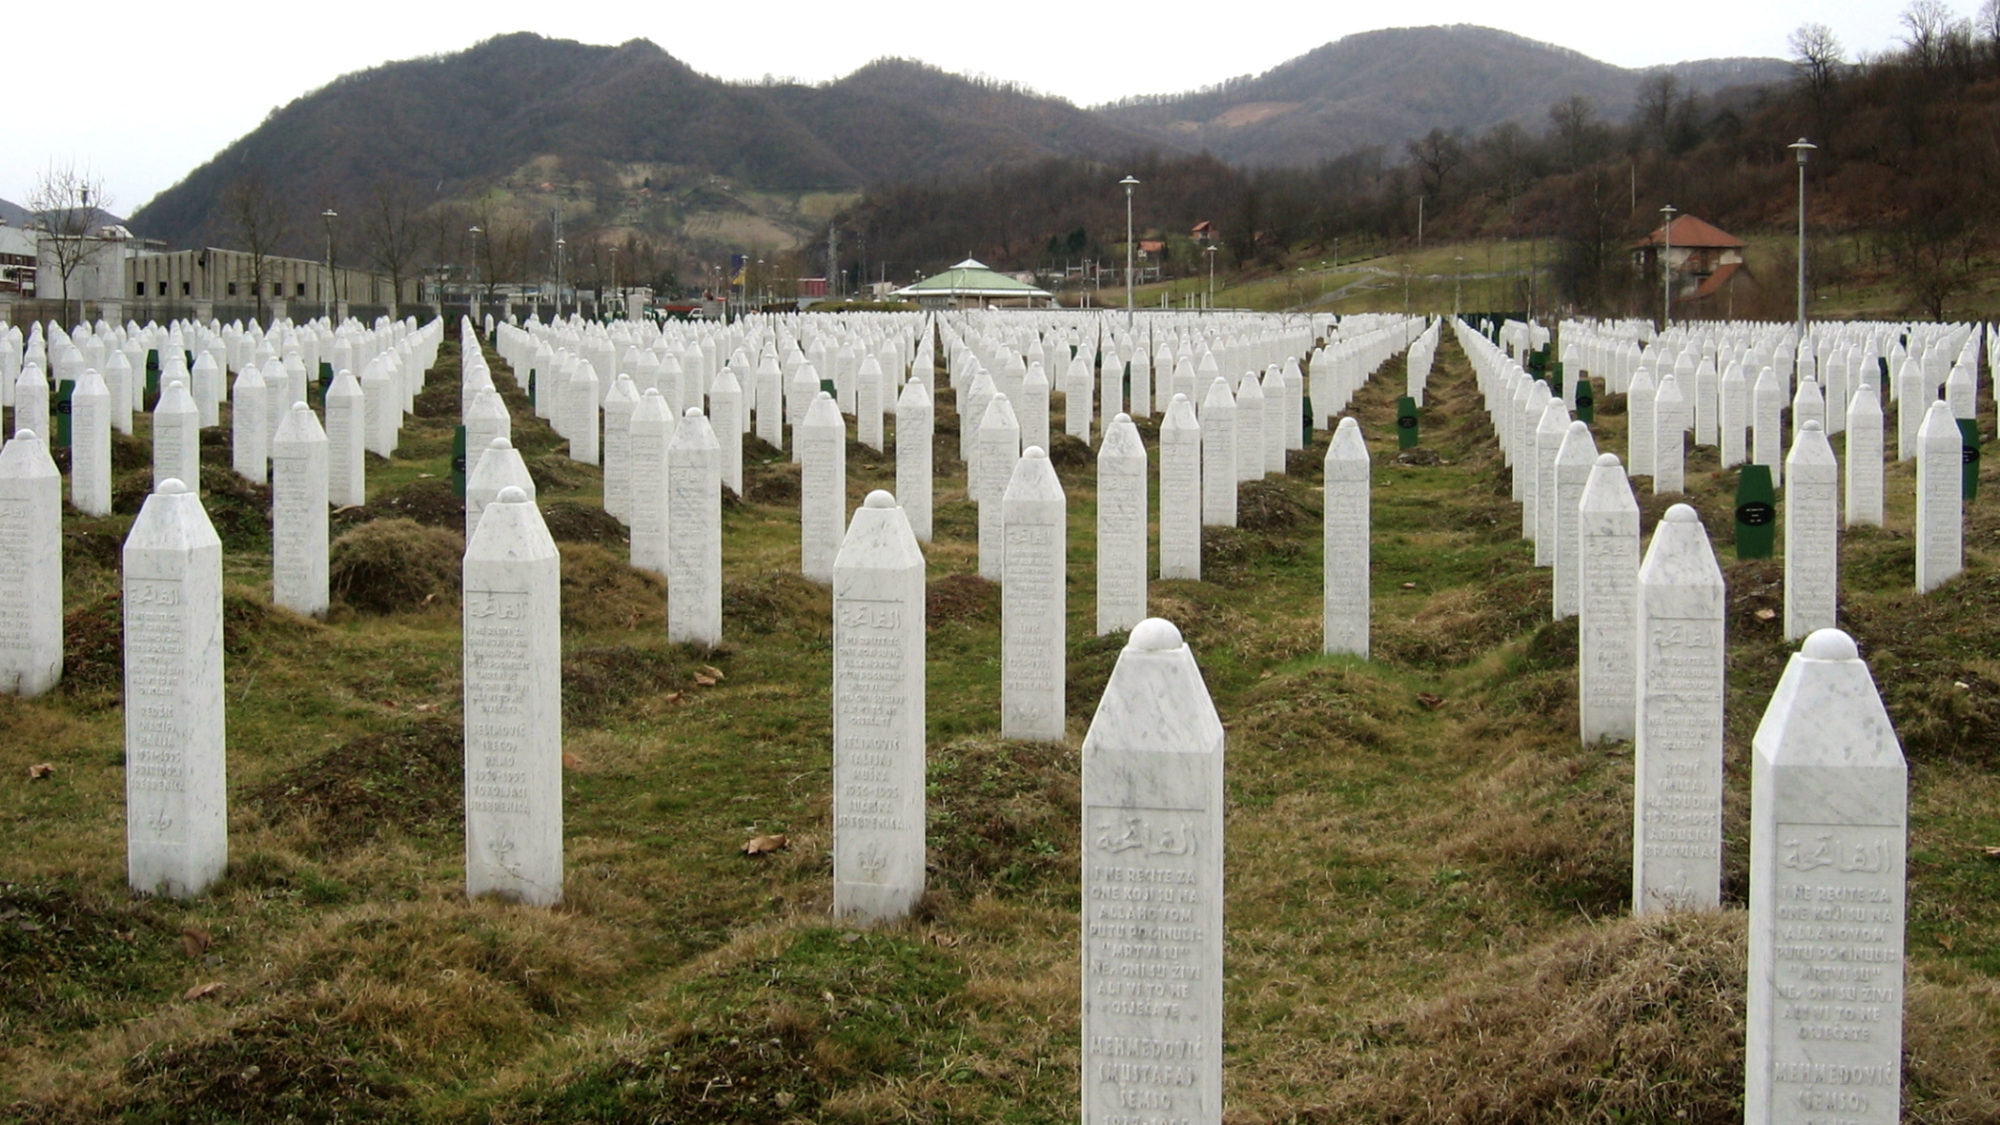 Rows of white, pillar-shaped gravestones are lined up in a field as part of a memorial to the Srebrenica genocide.